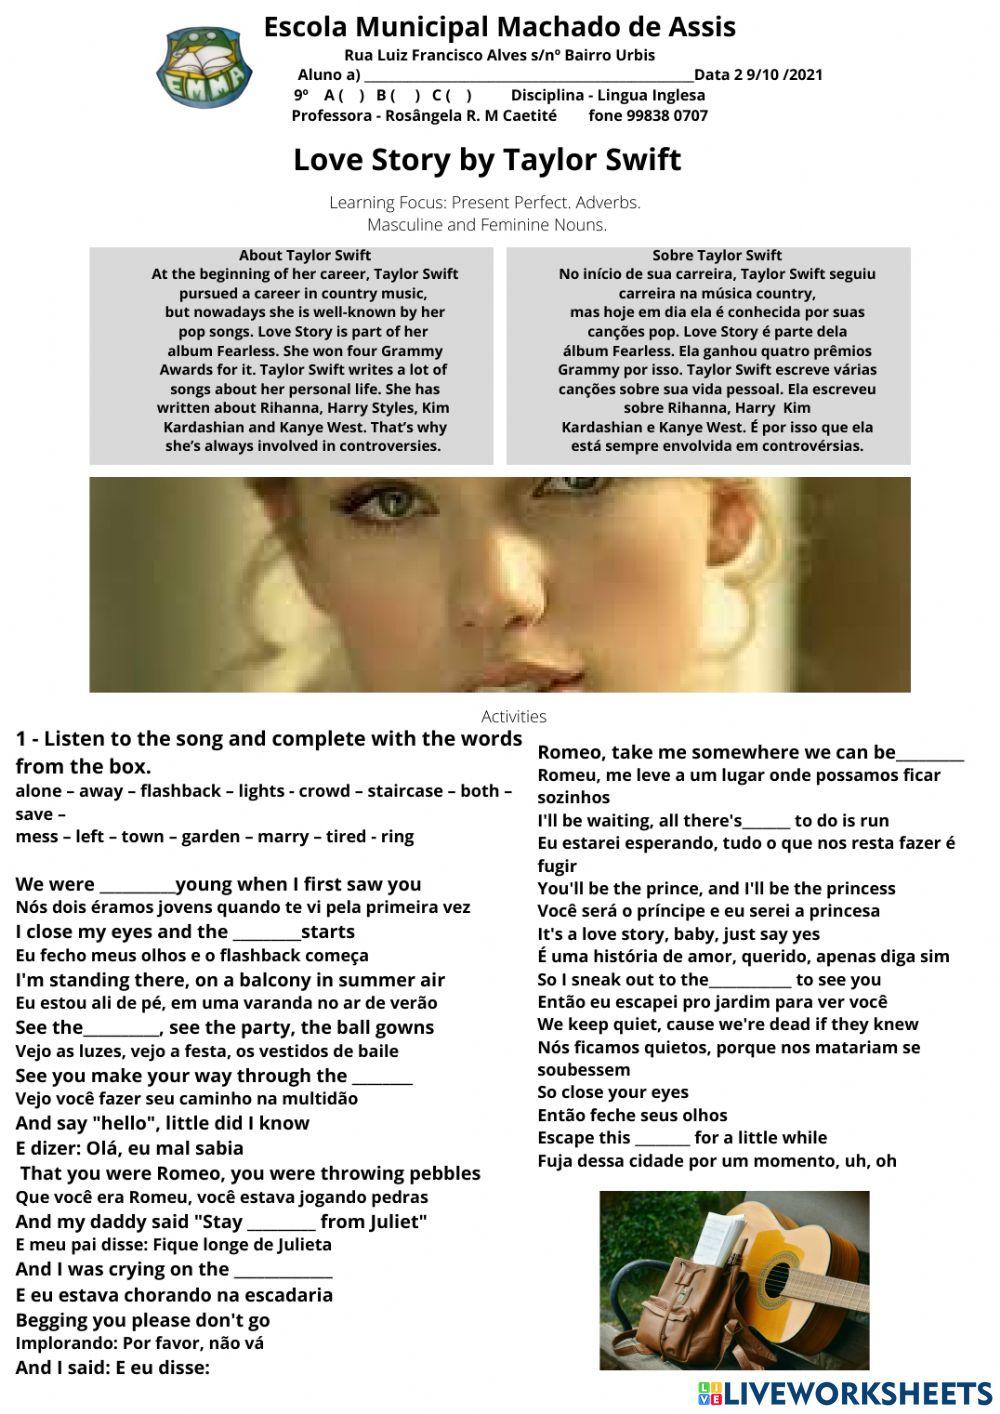 Song Love Story by Taylor Swift